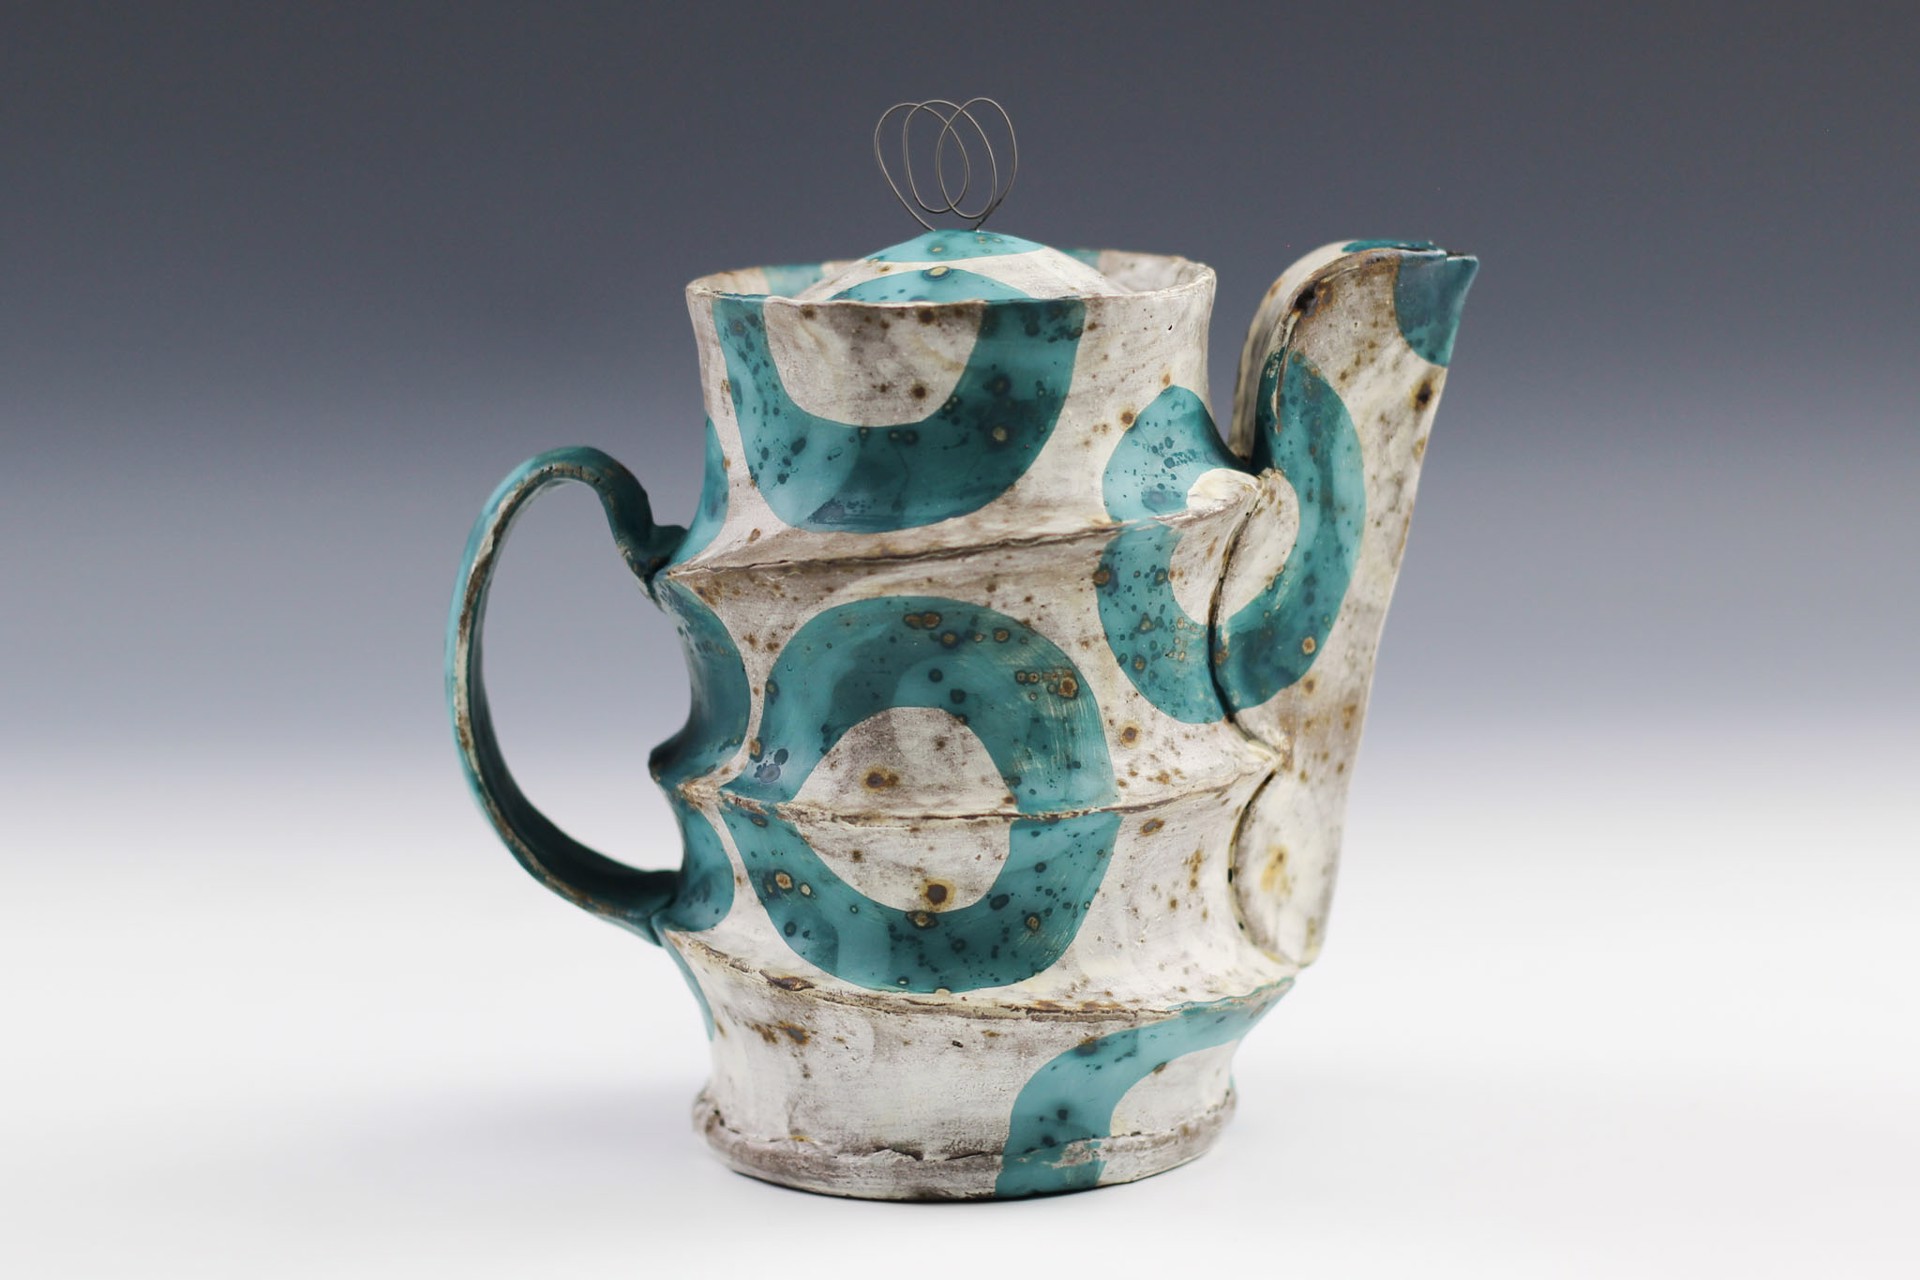 Teapots by Kate Marotz